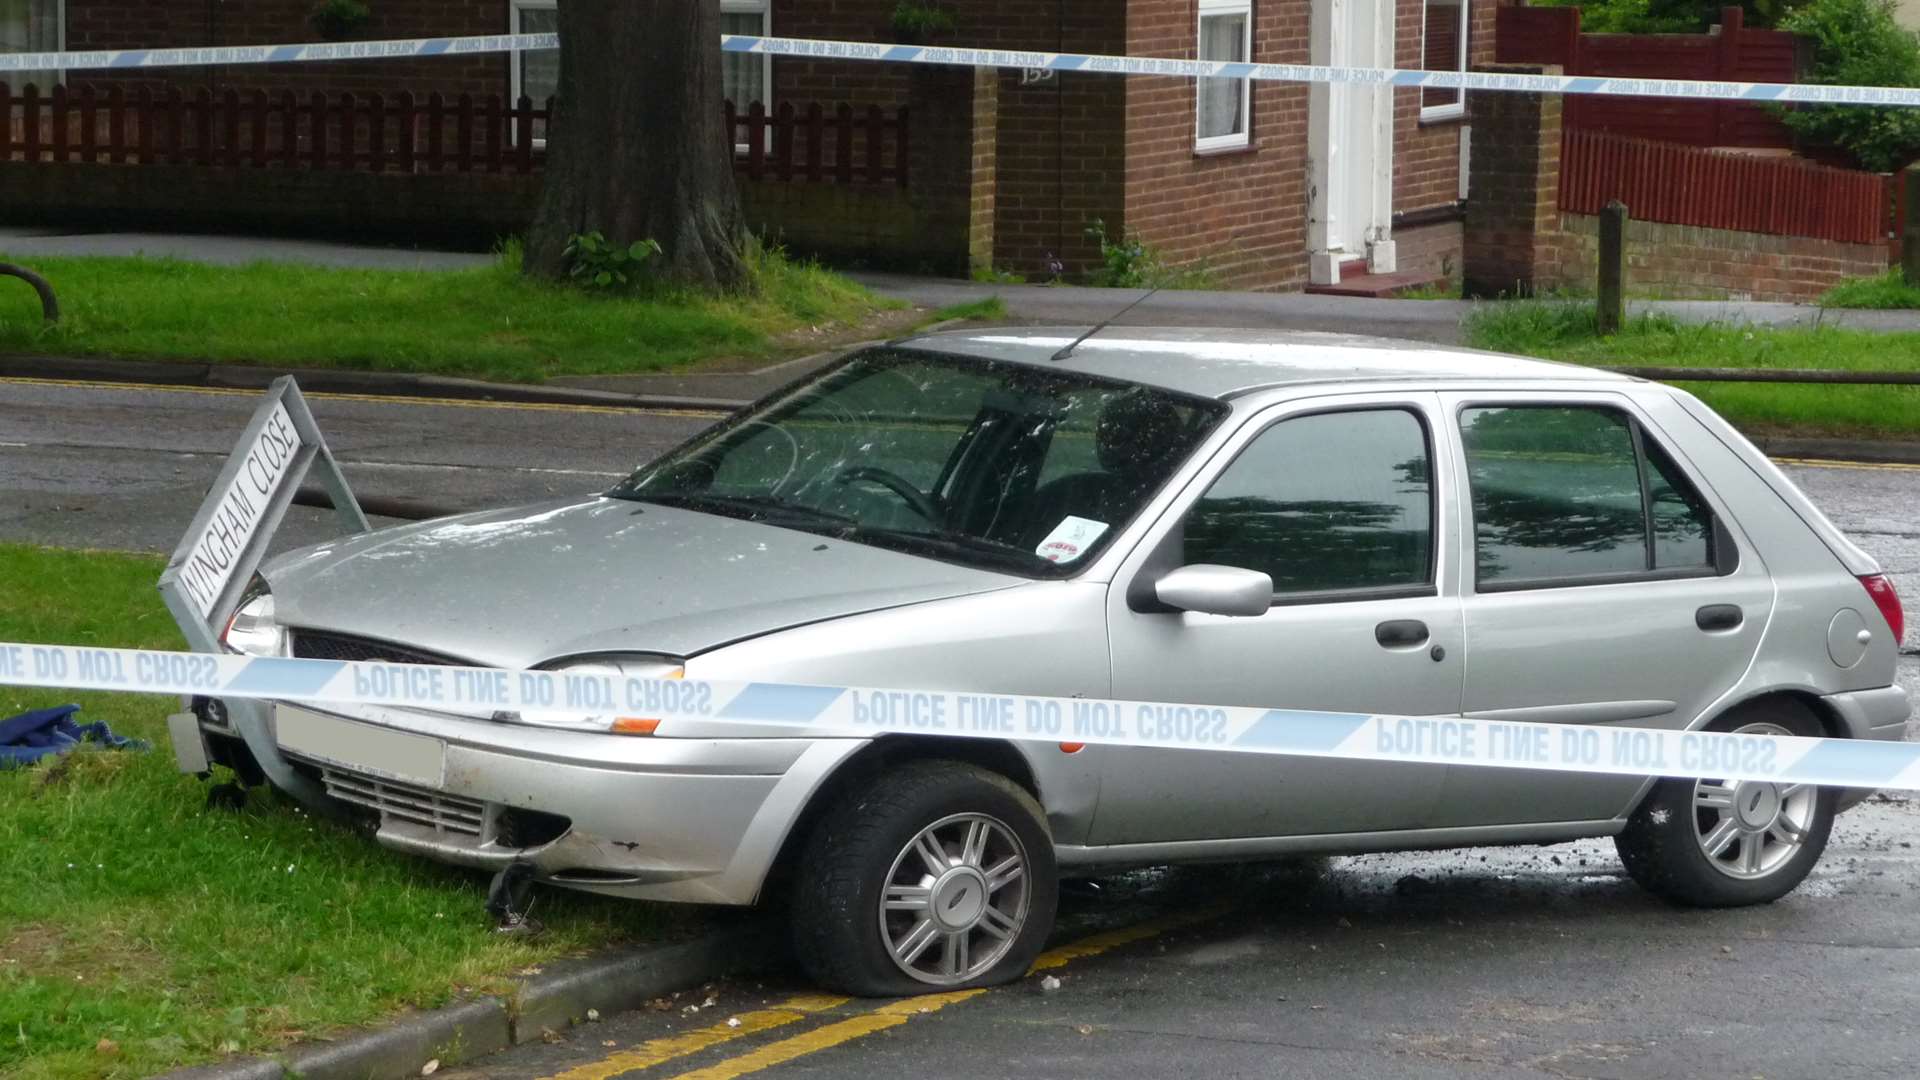 The spot where a pensioner crashed his car in Twydall. Picture: Martin Philbrick